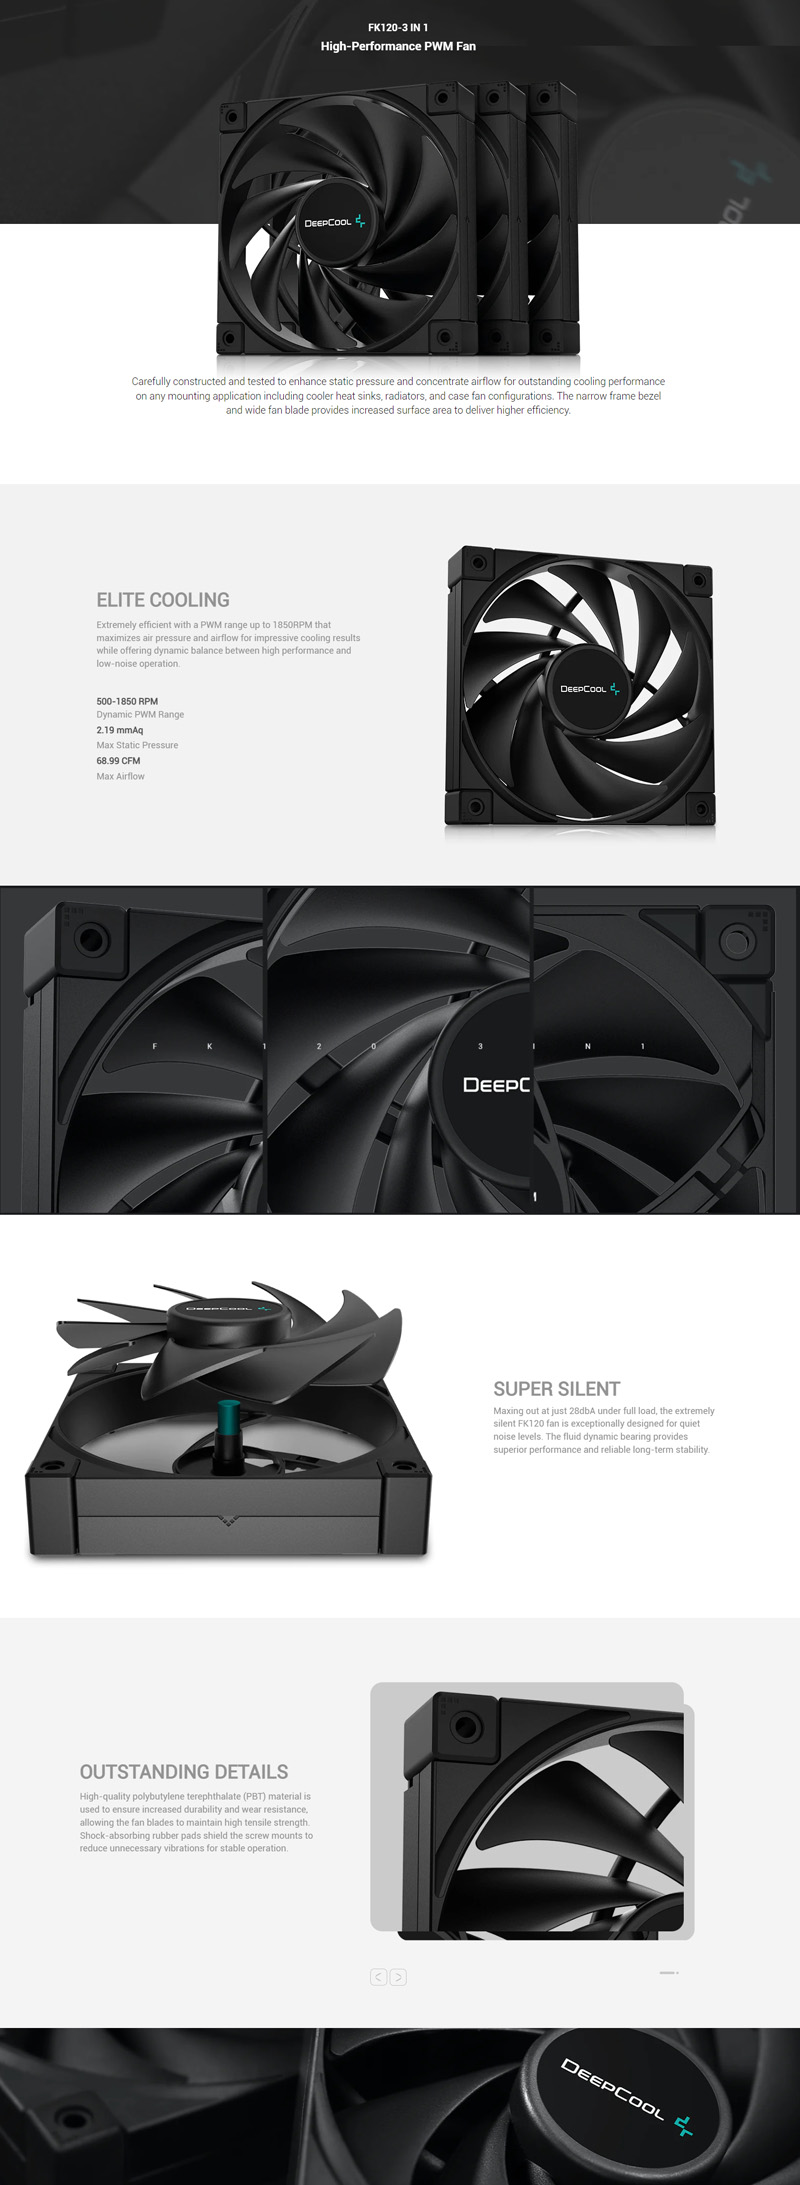 A large marketing image providing additional information about the product DeepCool FK120 3 in 1 120mm Case Fan Pack - Additional alt info not provided